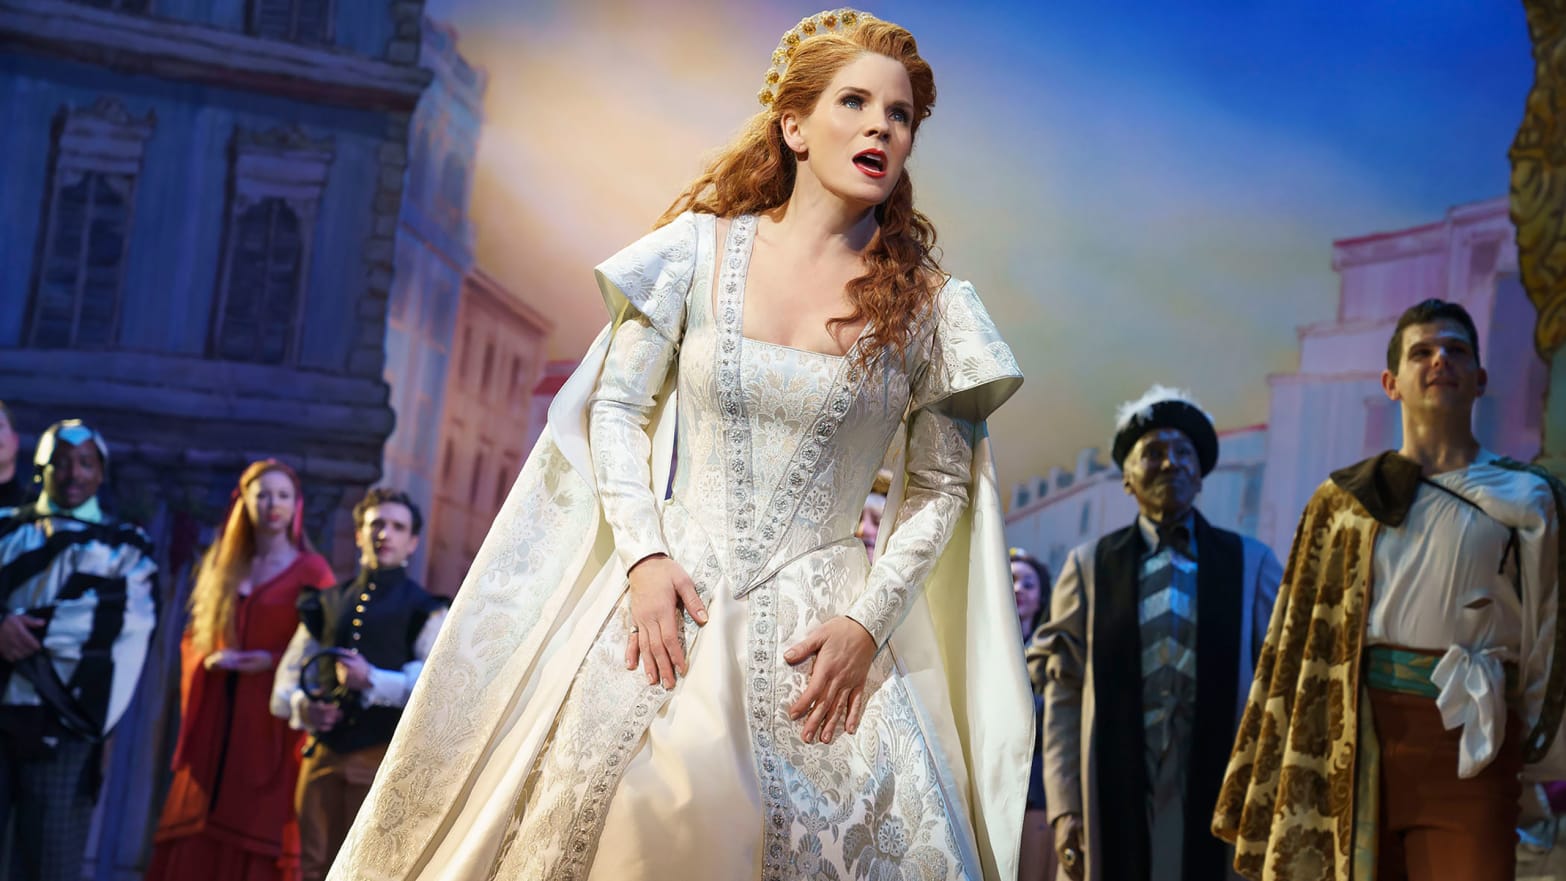 Kiss Me, Kate? In This Broadway Revival Shell Also Kick Your Butt